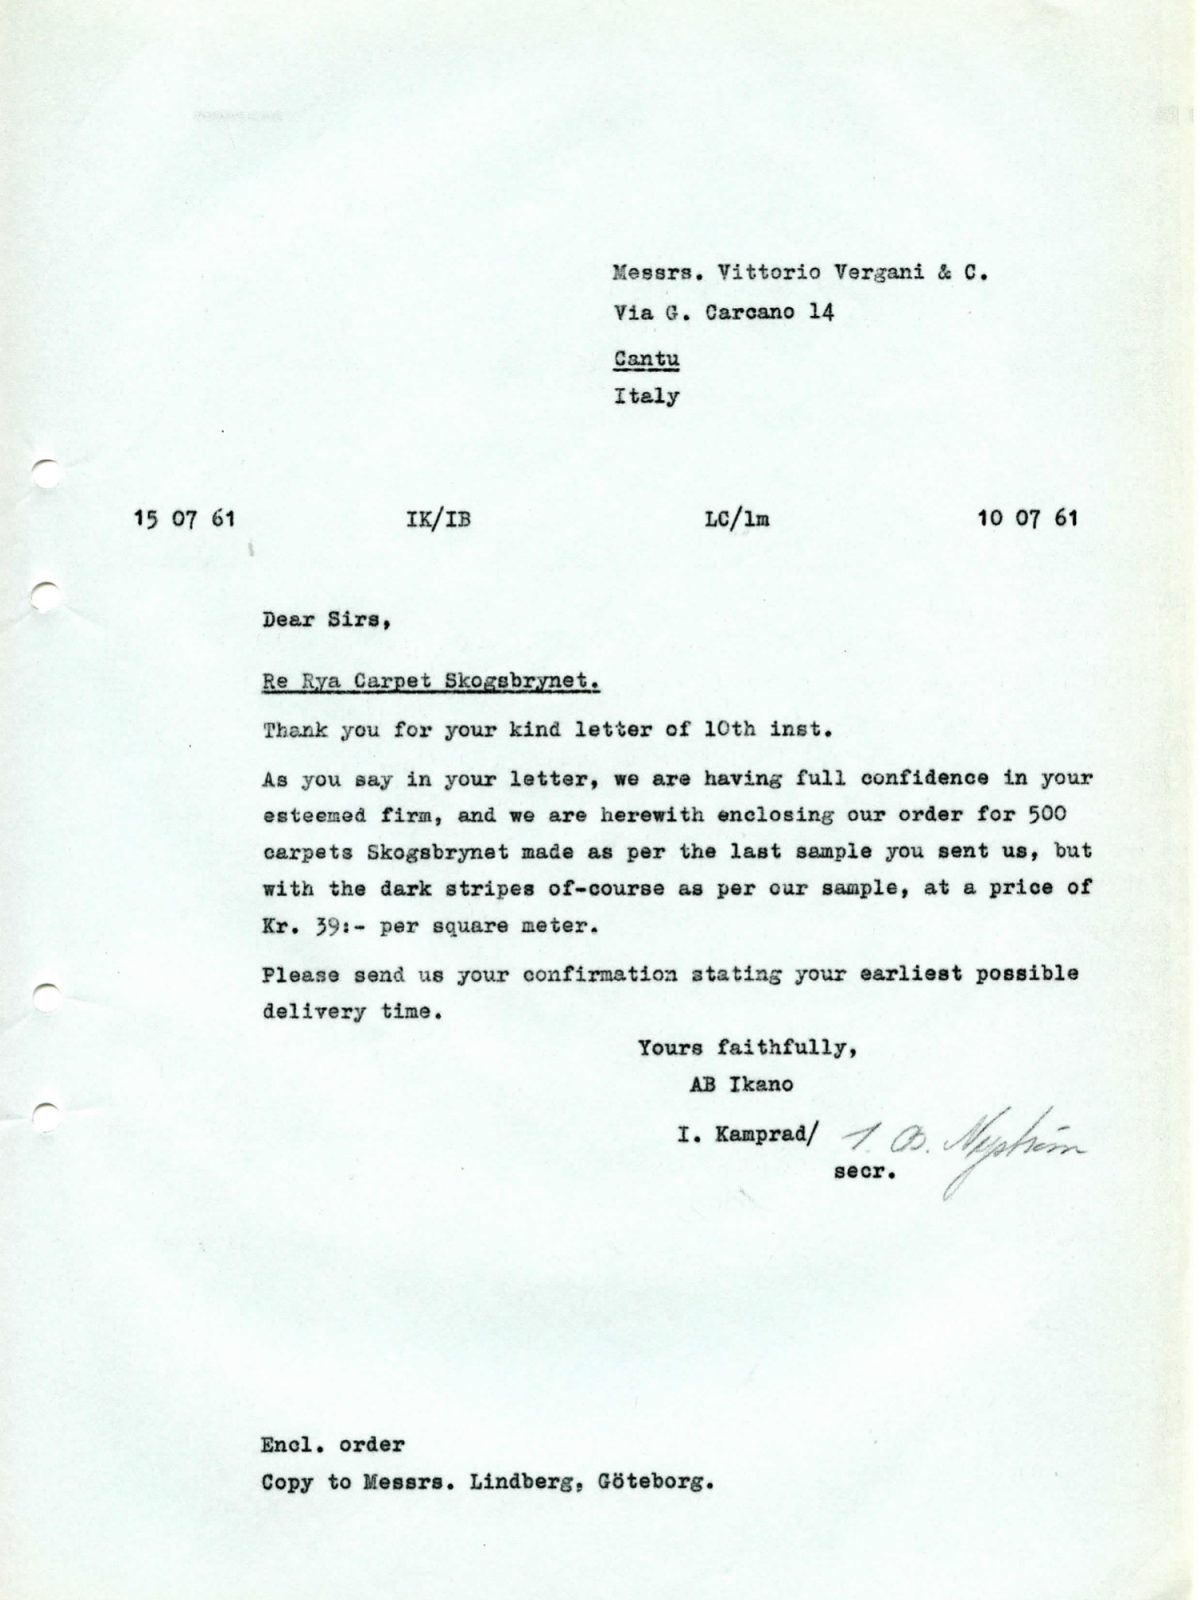 Facsimile of typewritten letter from Ingvar Kamprad to Vittorio Vergani & Co in Italy, dated 15 July 1961.